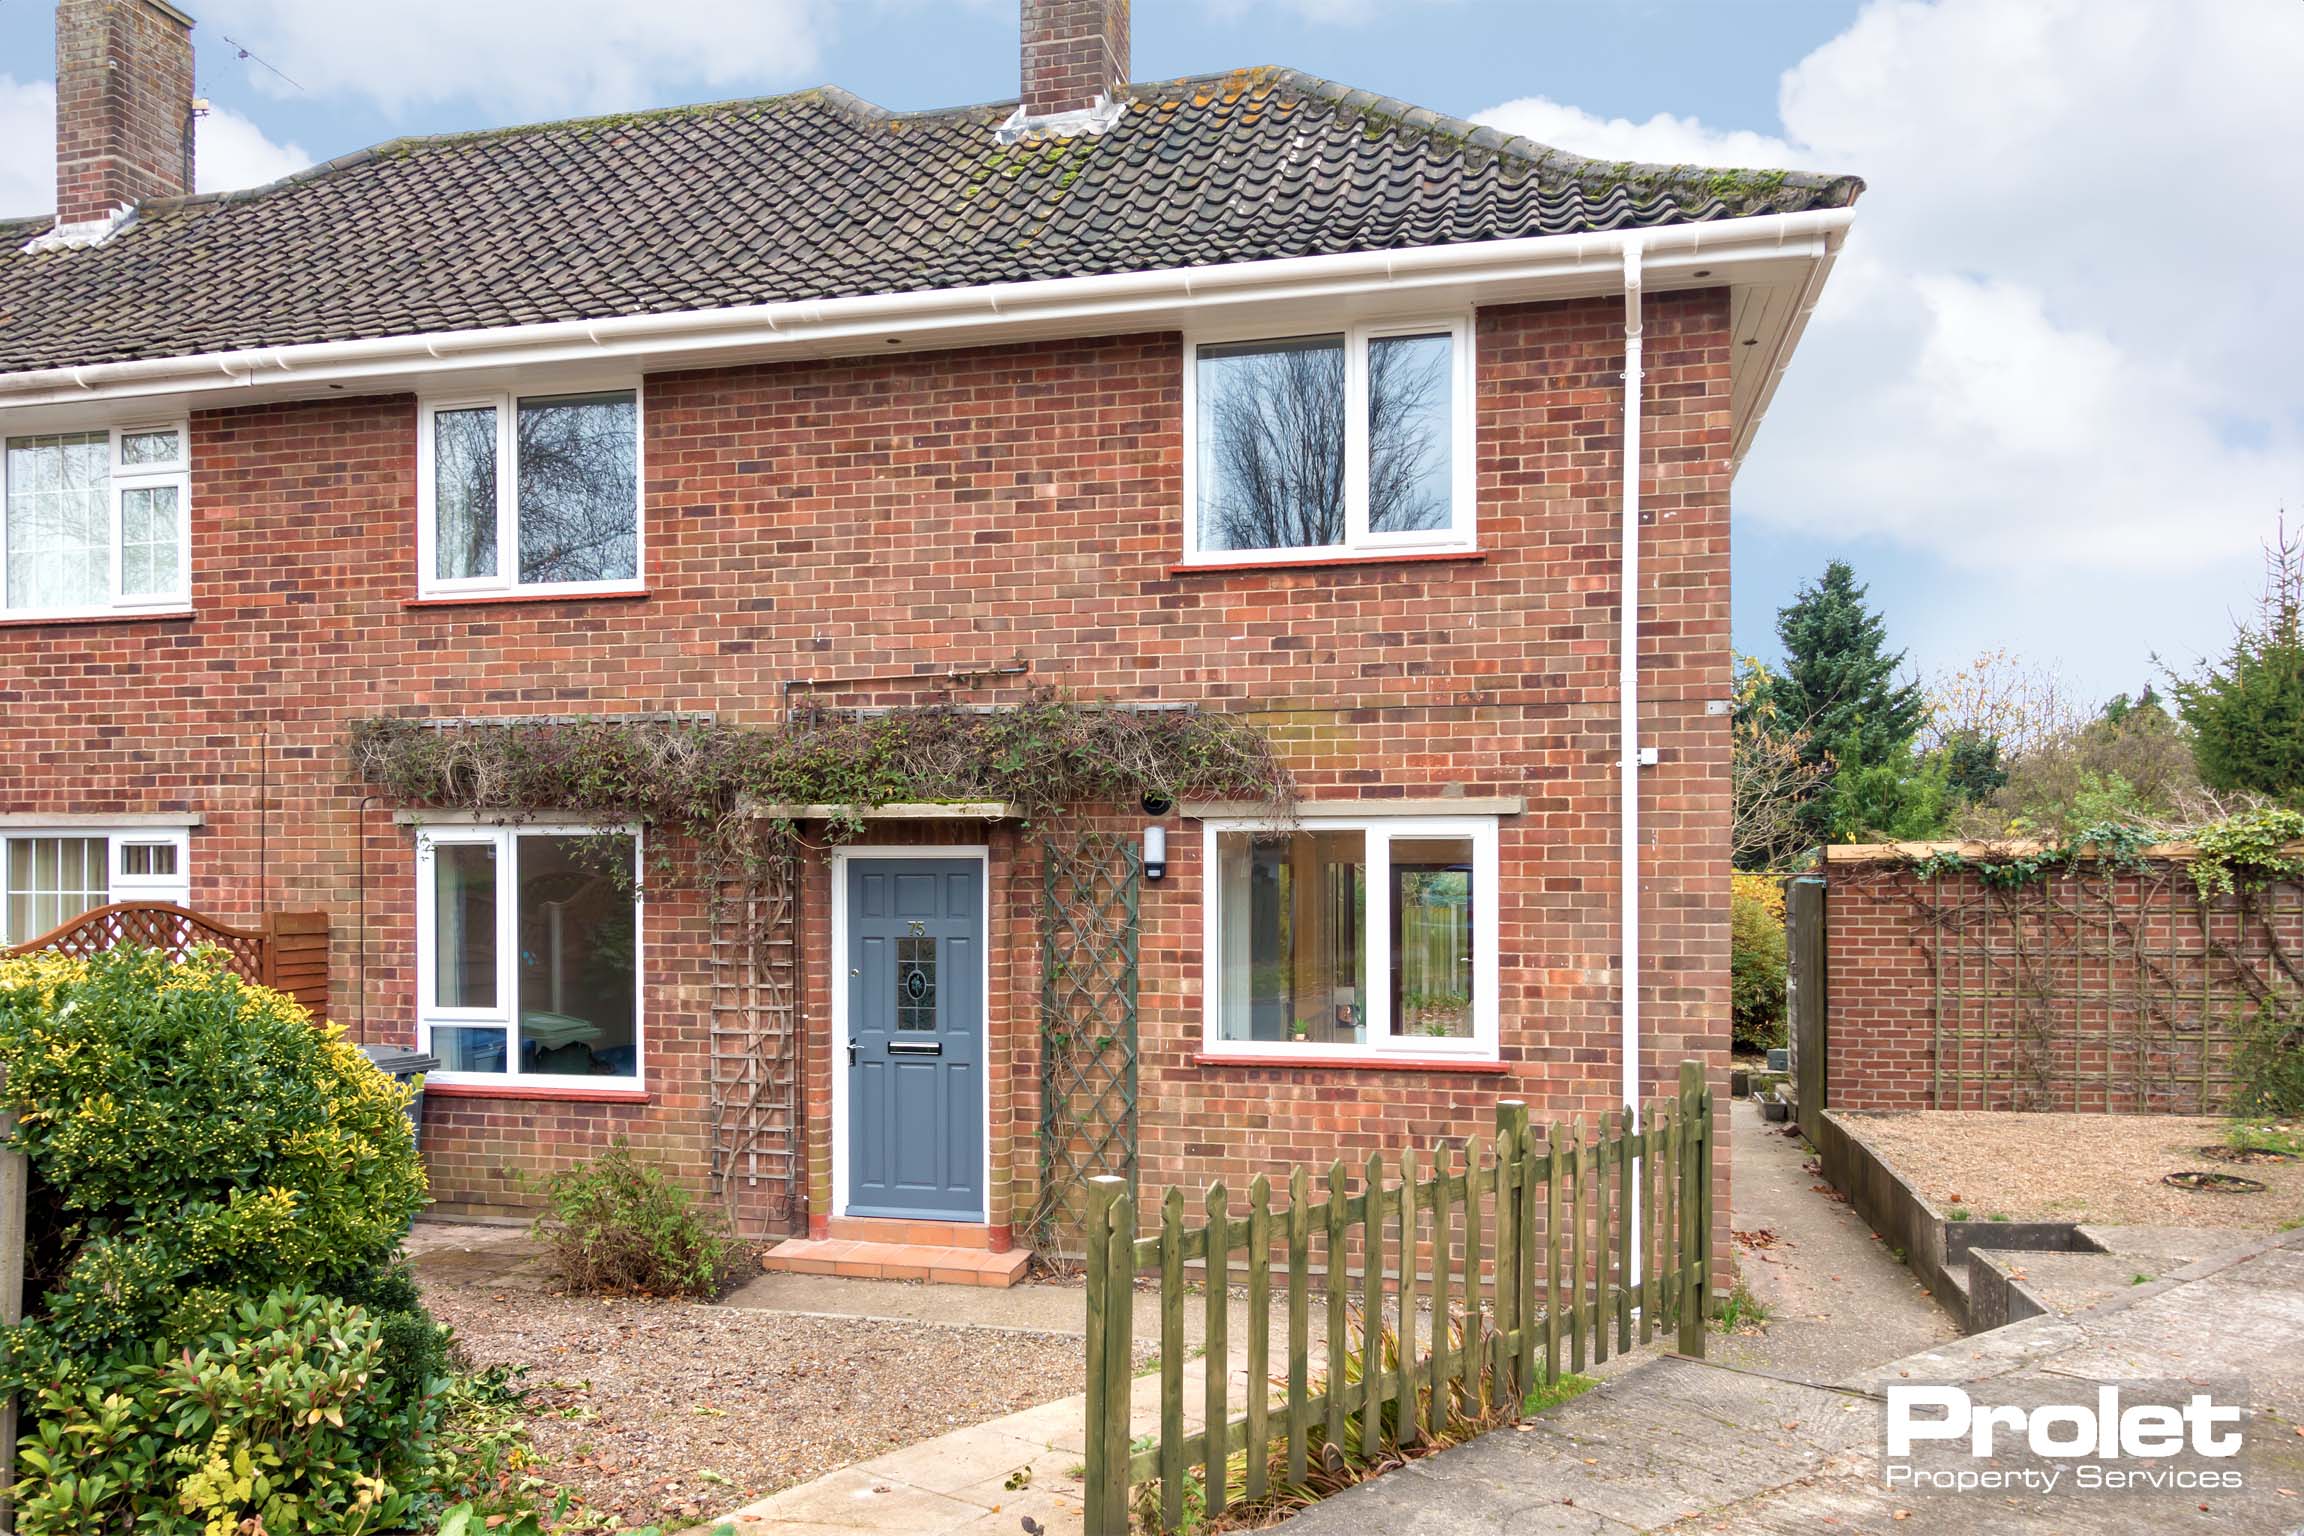 Booking a viewing for Wycliffe Road, Norwich, NR4 7DU